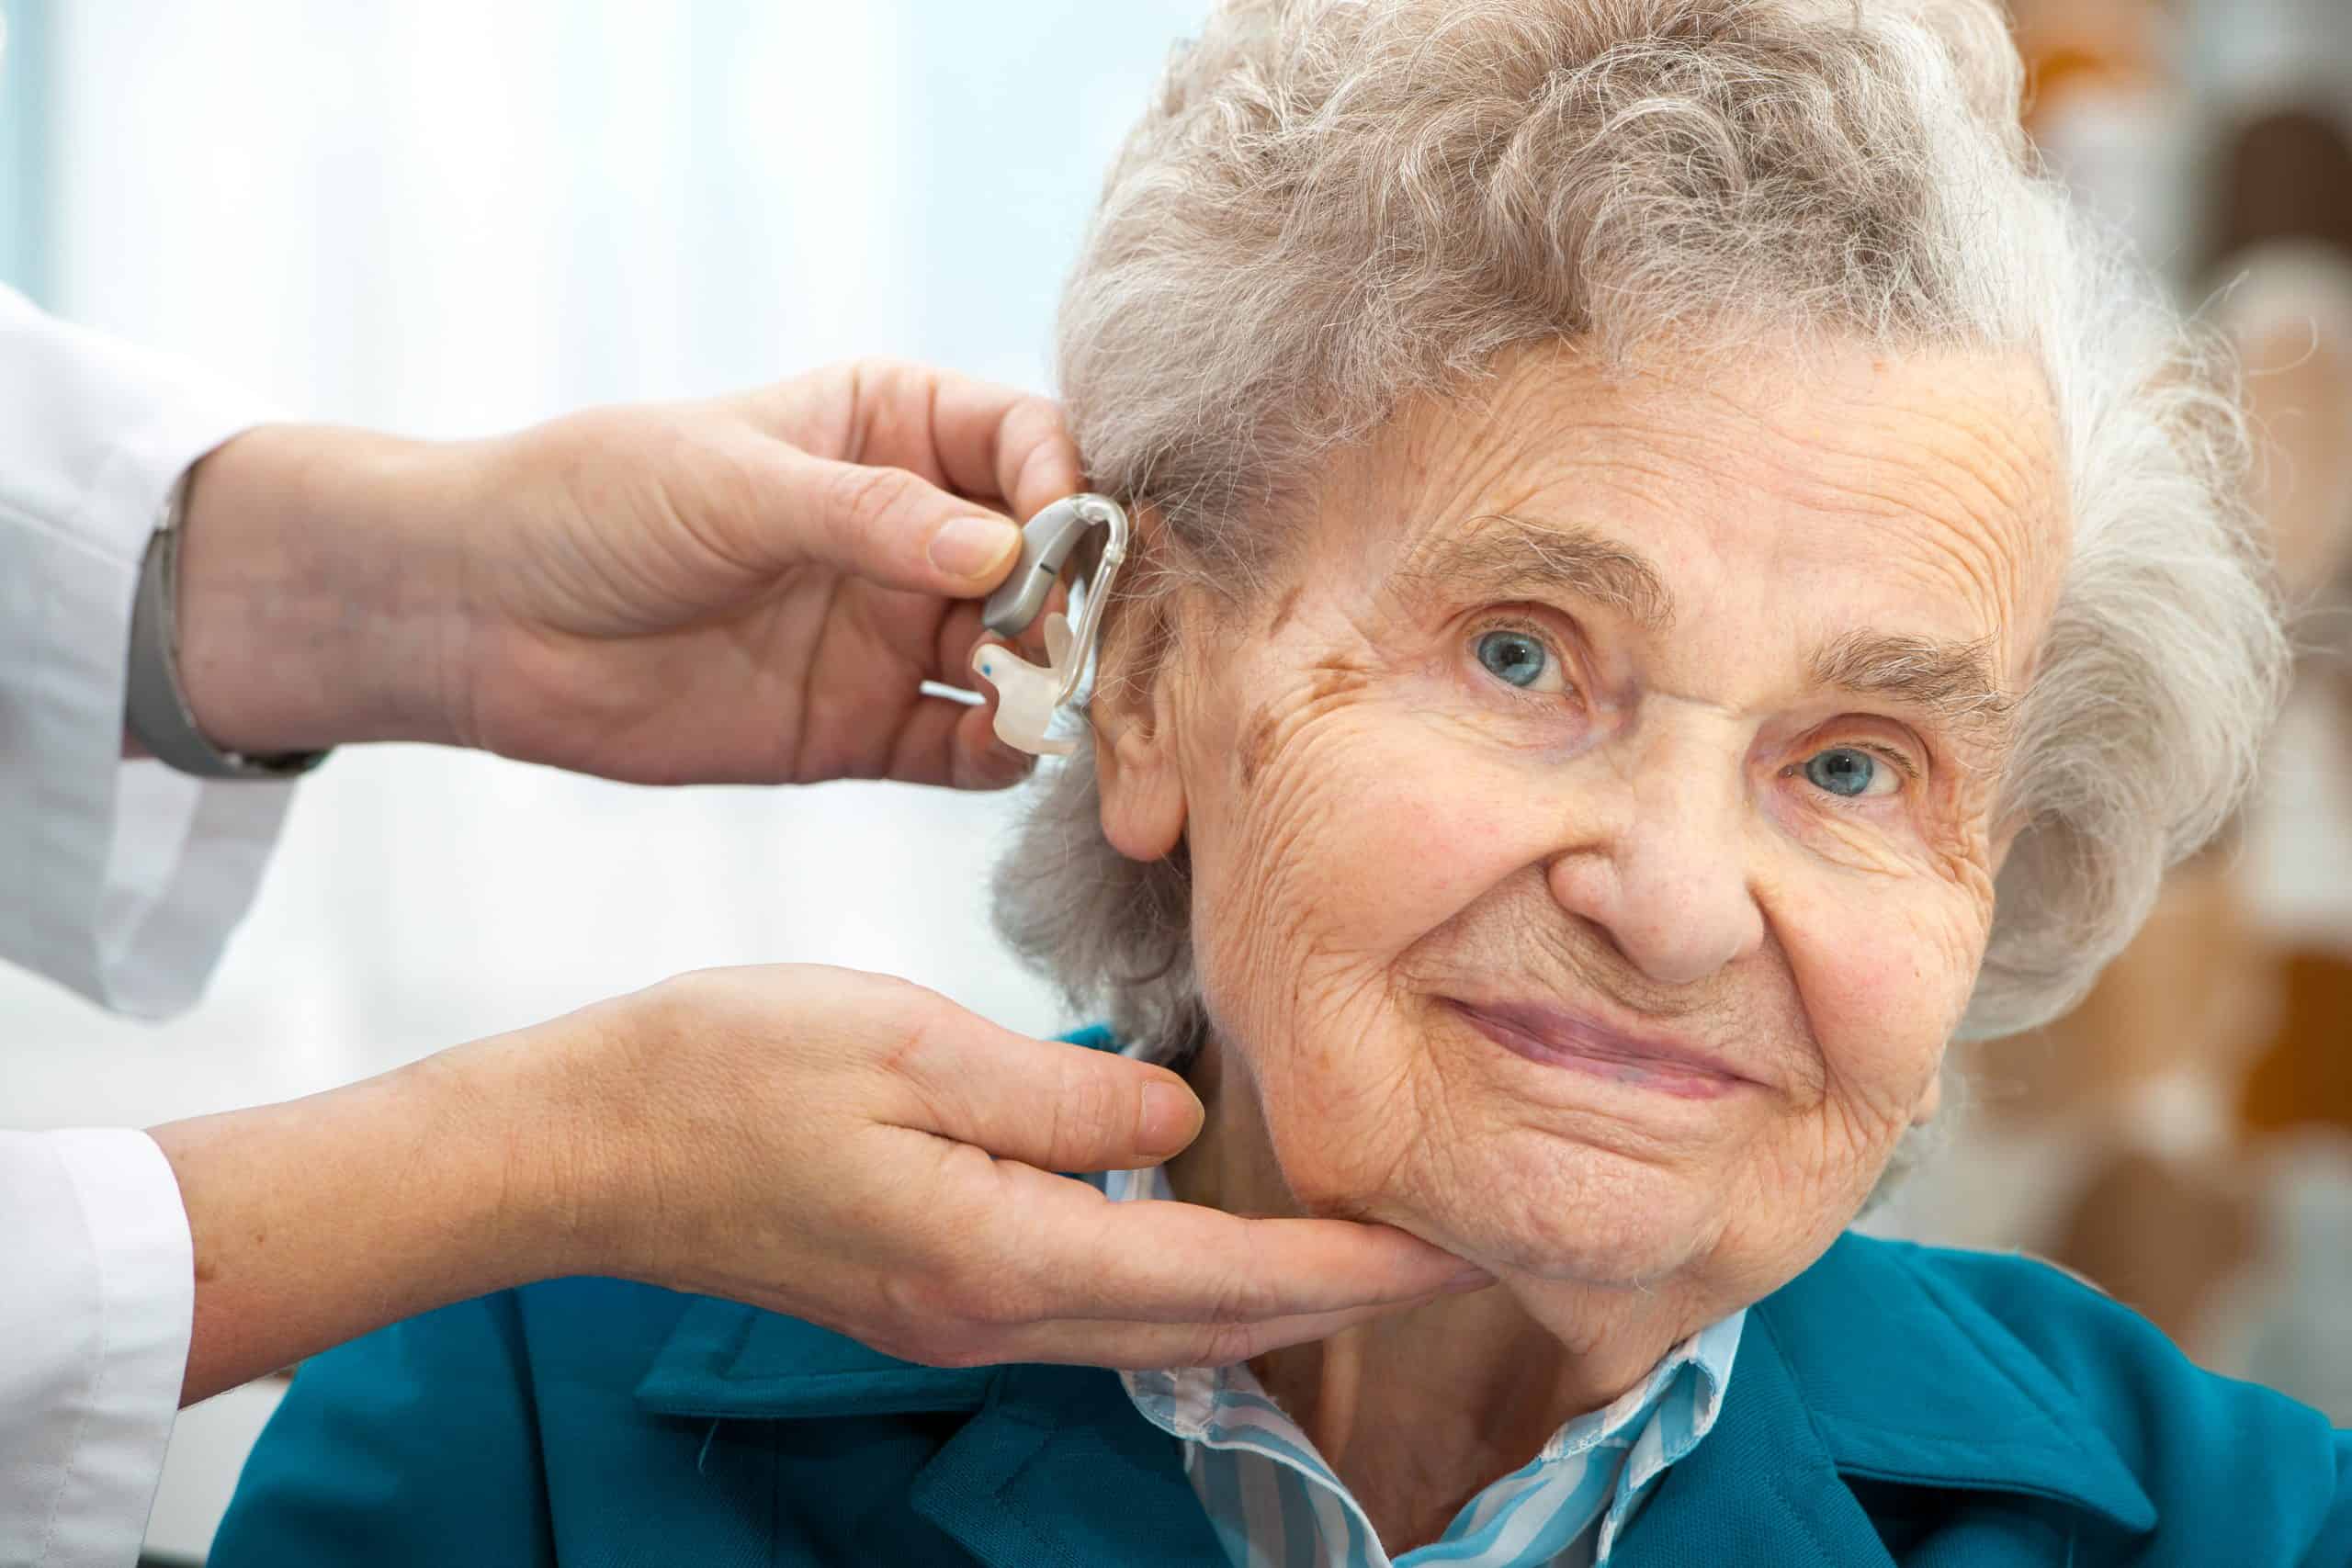 A doctor inserting a hearing aid on a senior